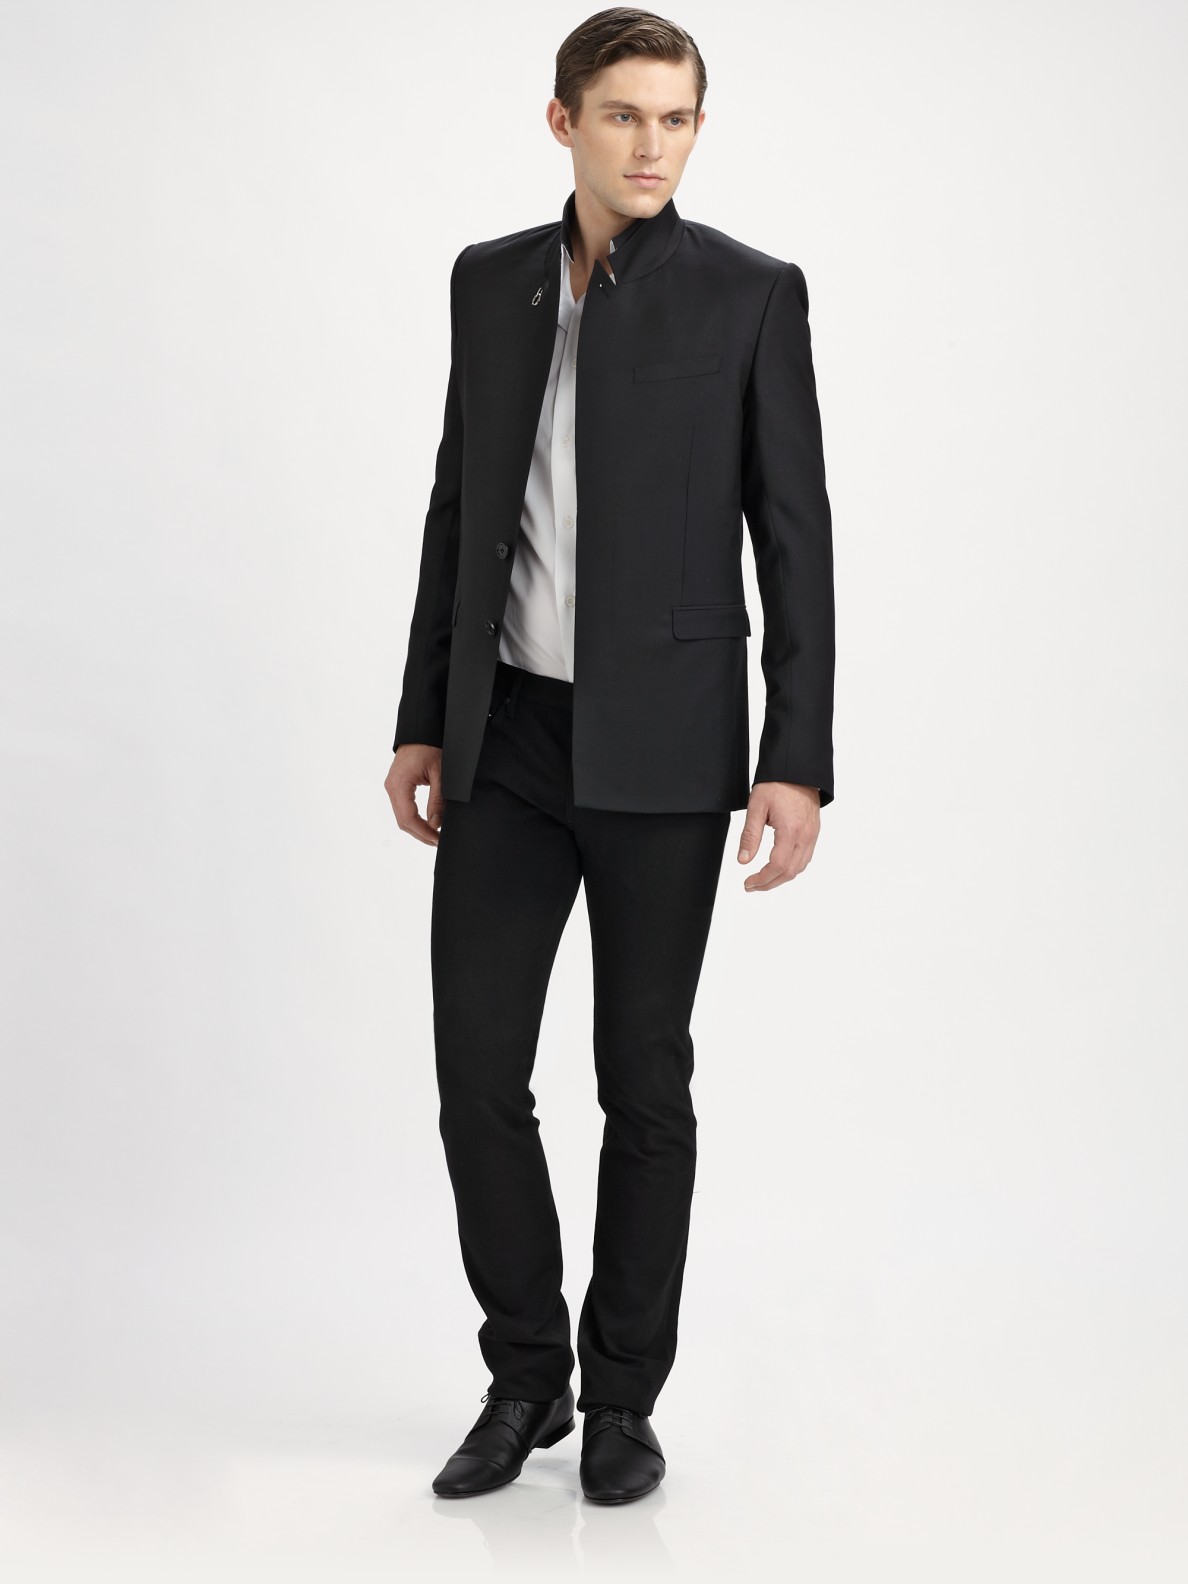 Lyst - Dior Homme Stand-collar Wool Coat in Black for Men